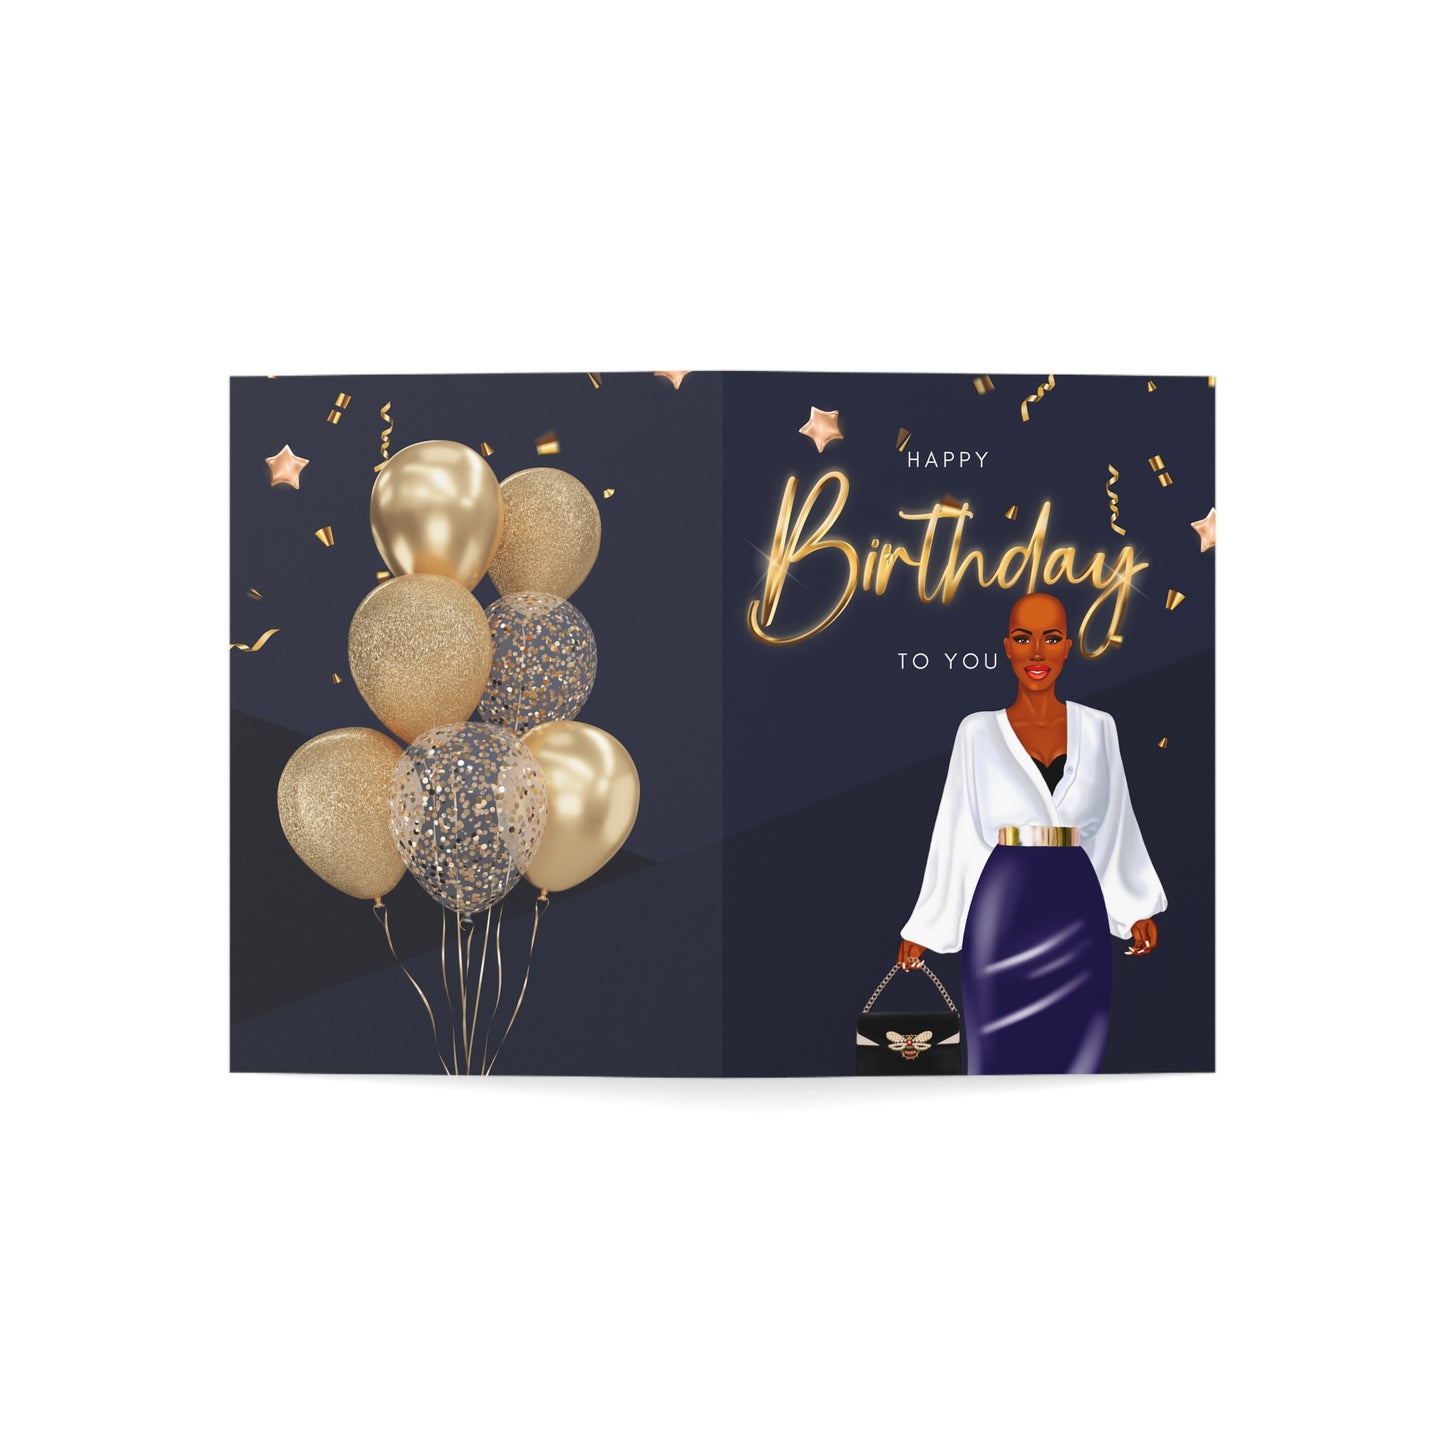 Happy Birthday Folded Greeting Card (1, 10, 30, and 50pcs)| Birthday Card with Black Woman